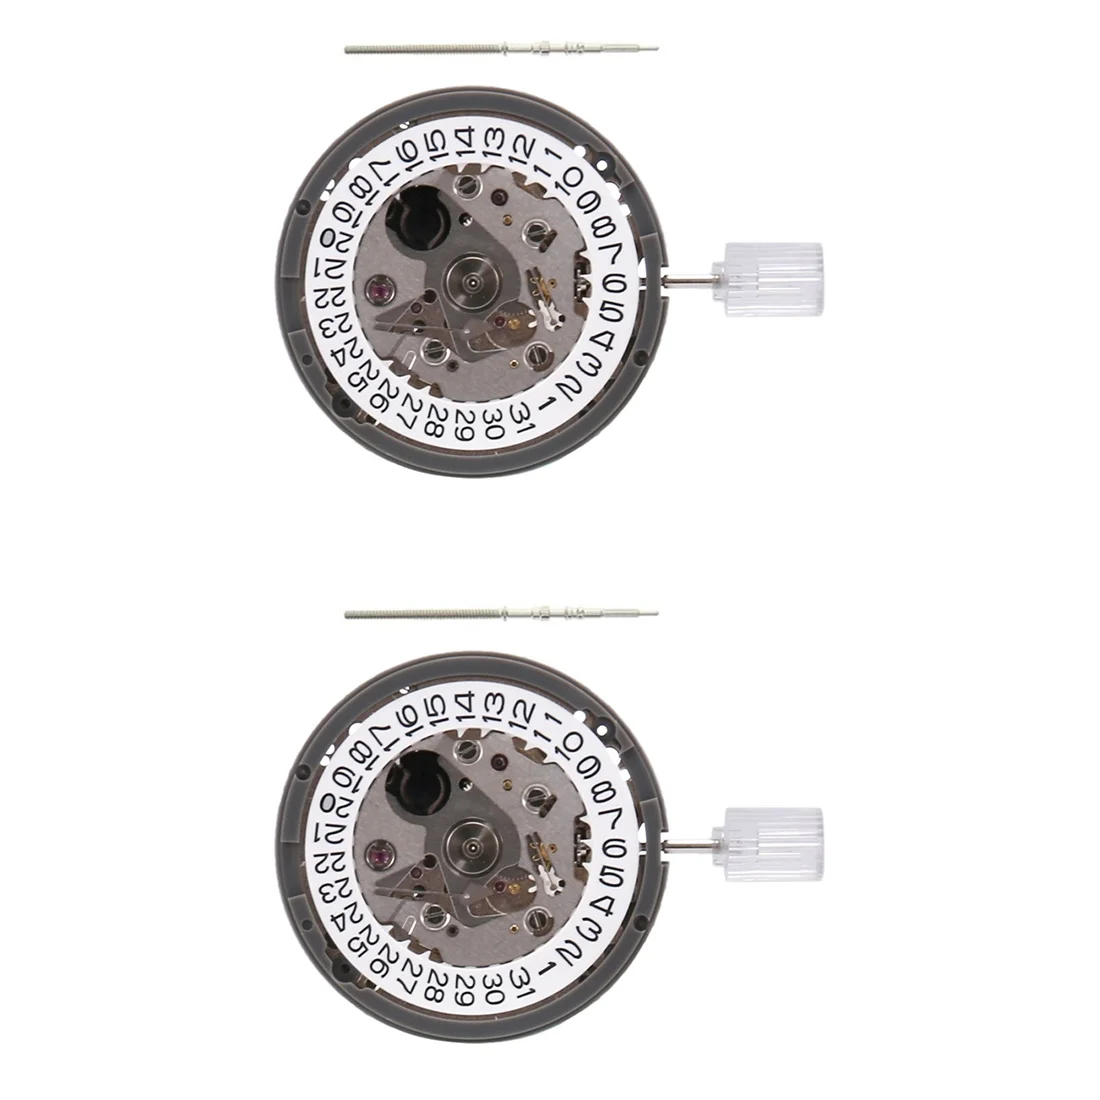 

2Pcs NH35/NH35A Mechanical Movement with White Date Window Luxury Automatic Watch Movt Replace Kit High Accuracy,White